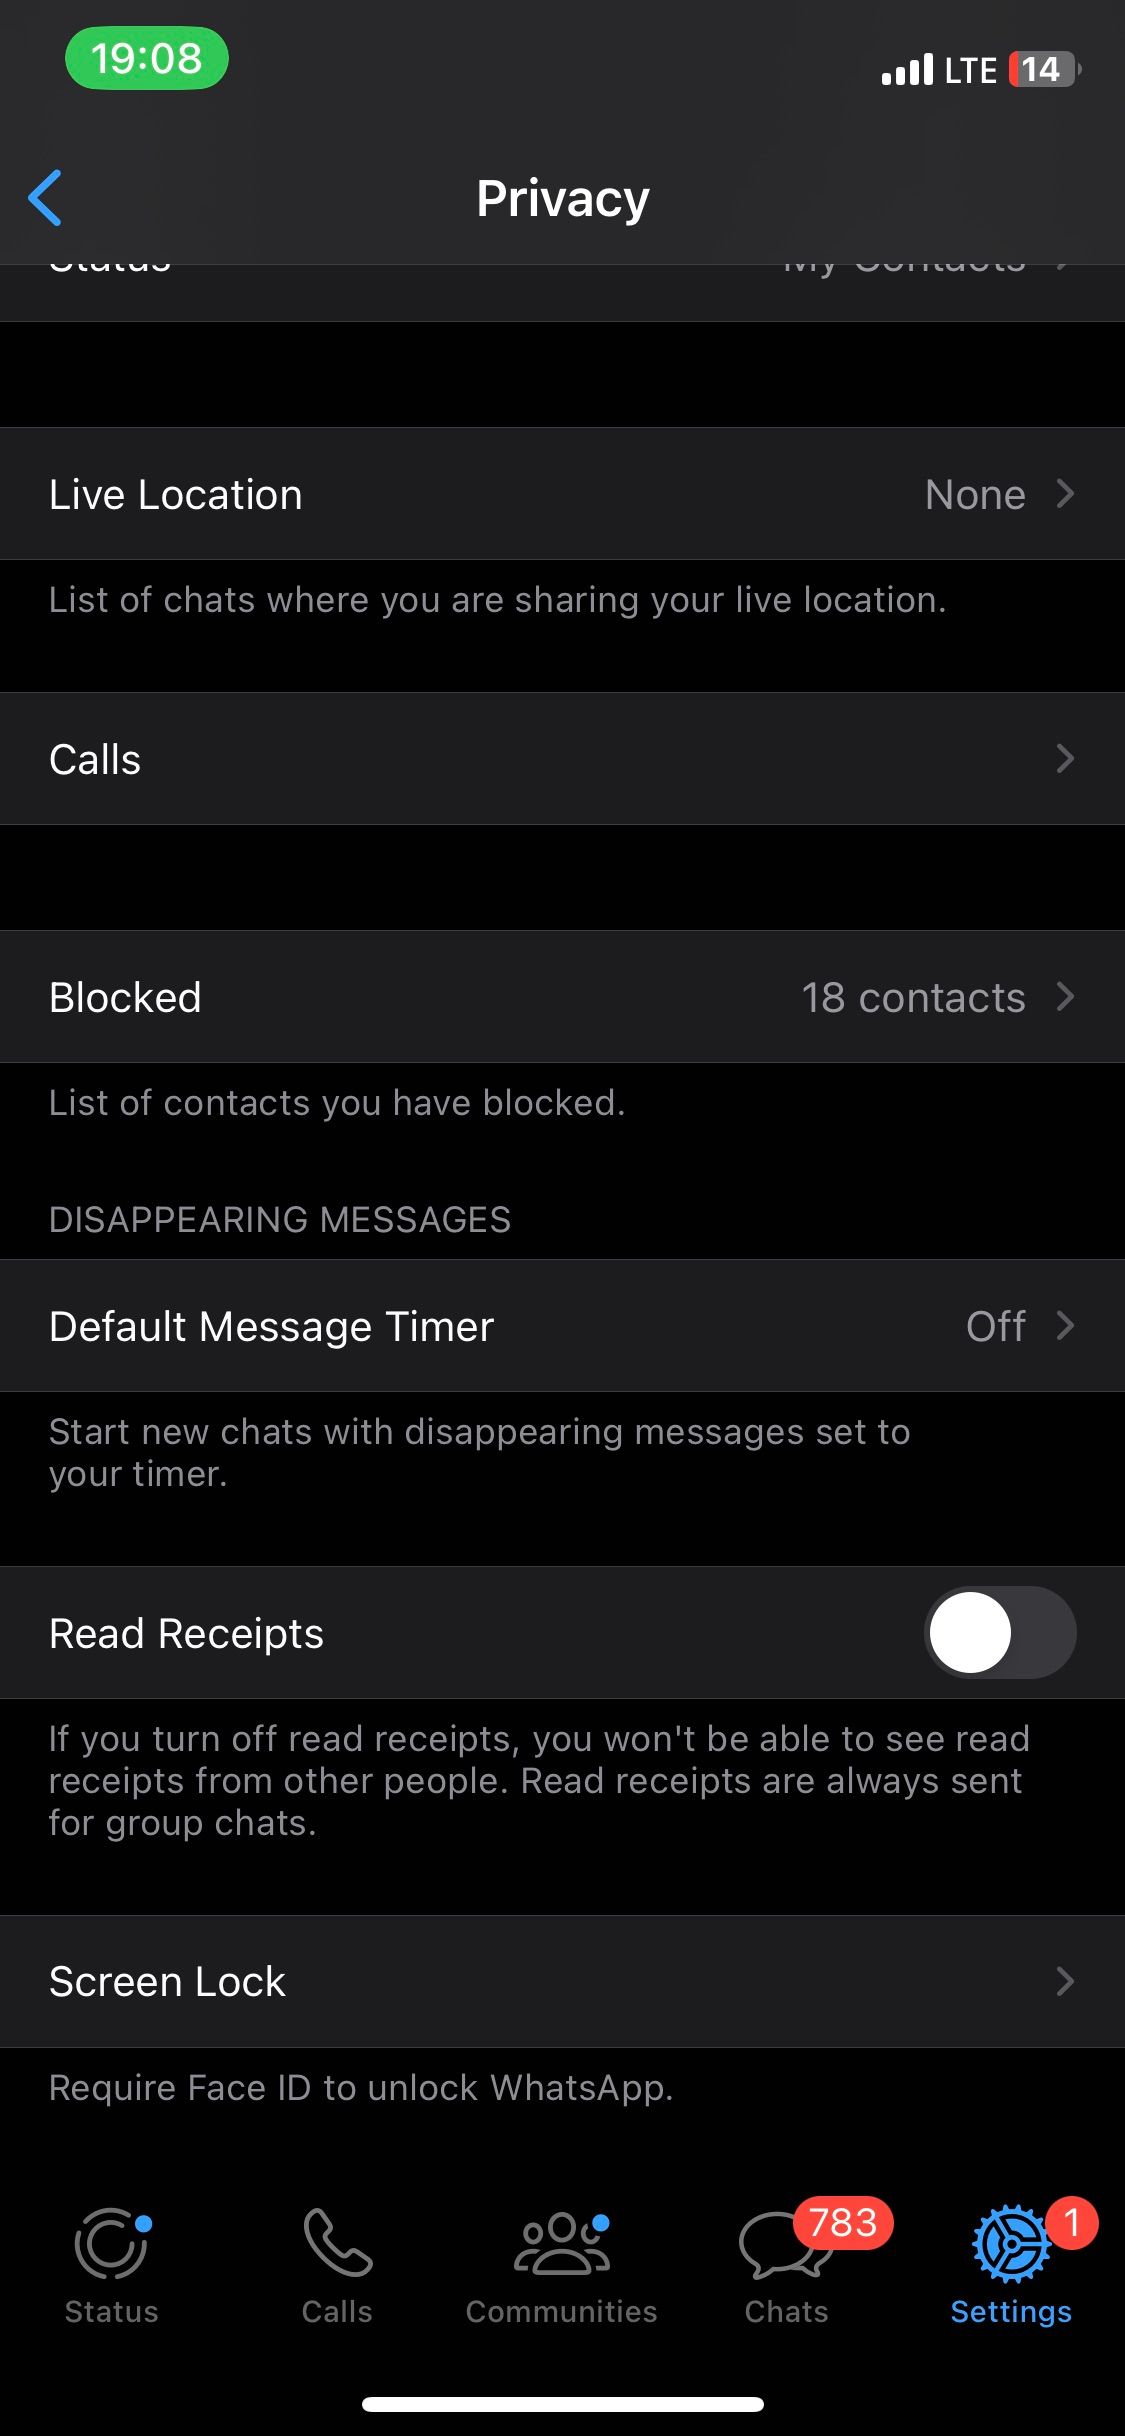 WhatsApp Privacy Settings Read Receipts Off